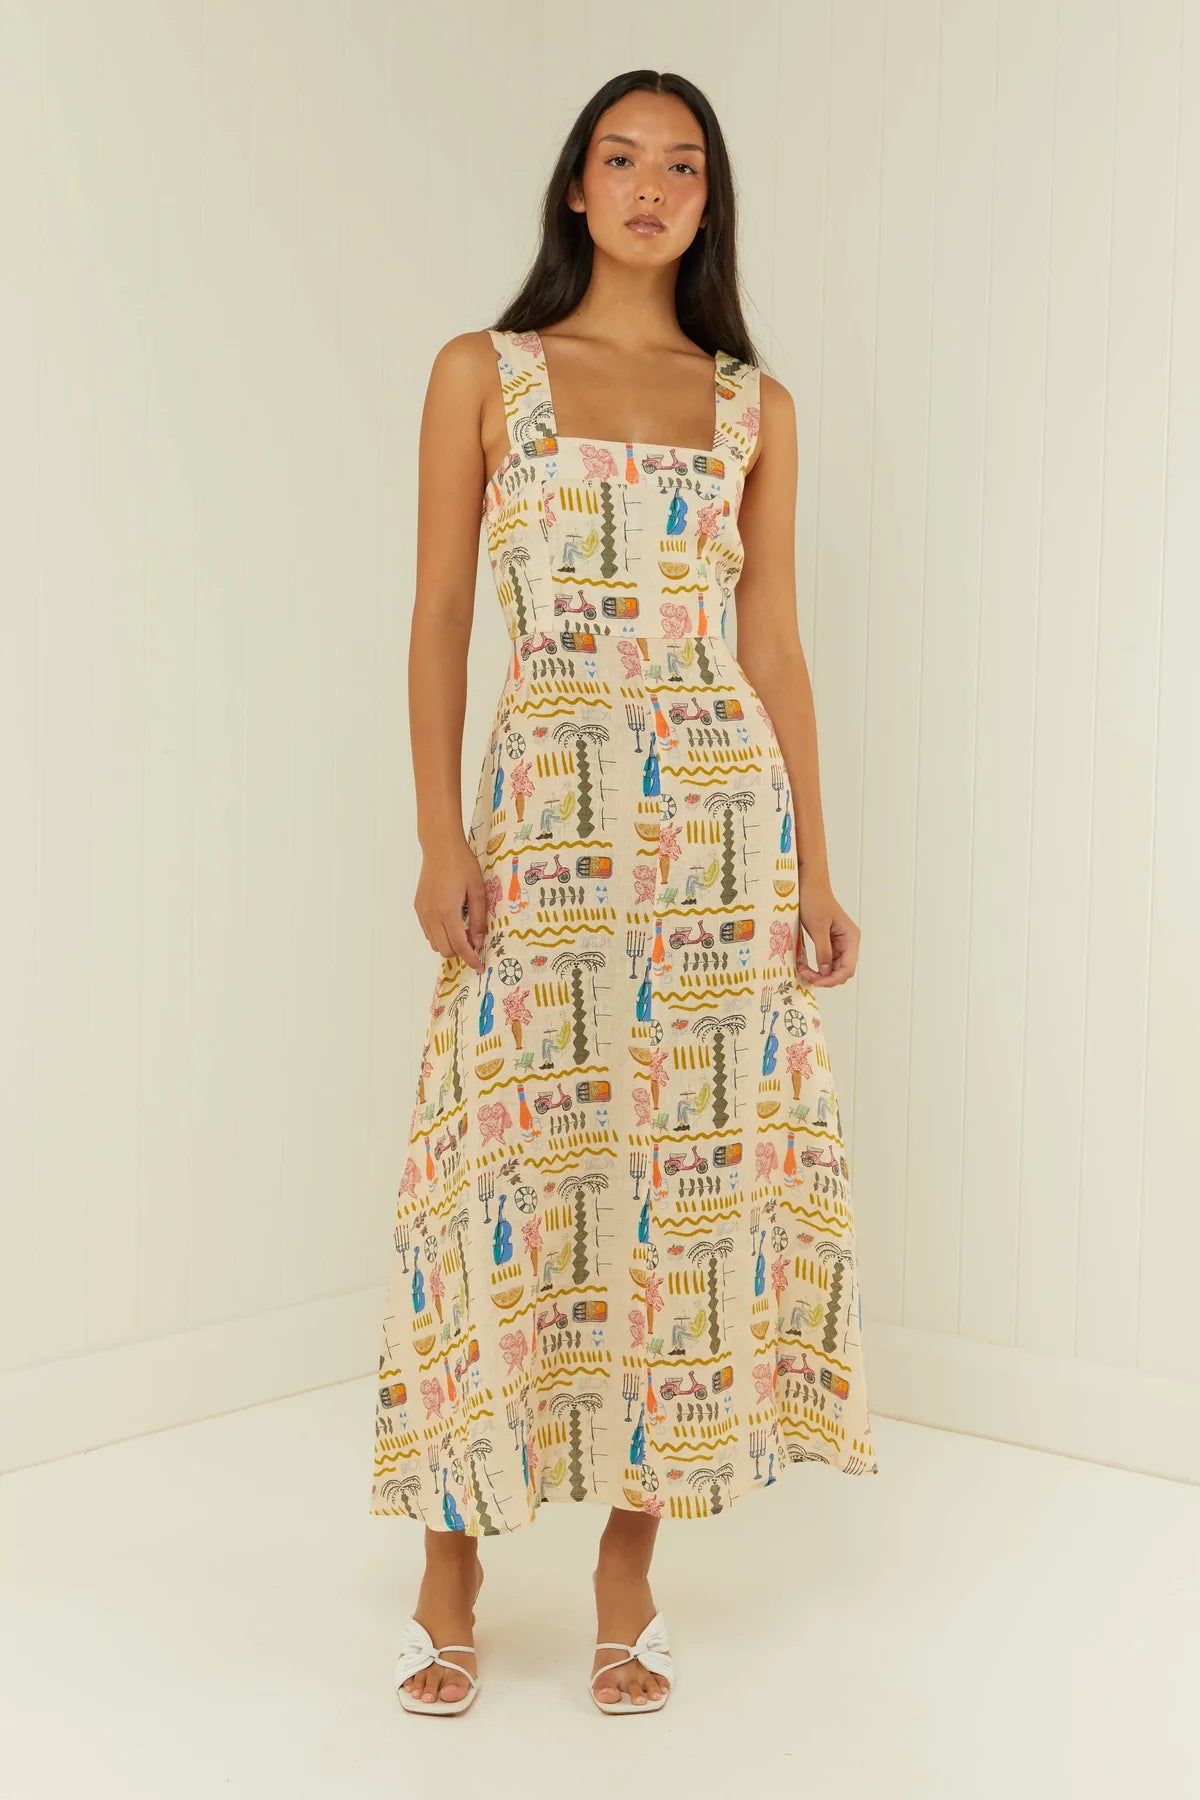 Linen summer dress in Italian inspired print with a fitted bodice and A line skirt model shot